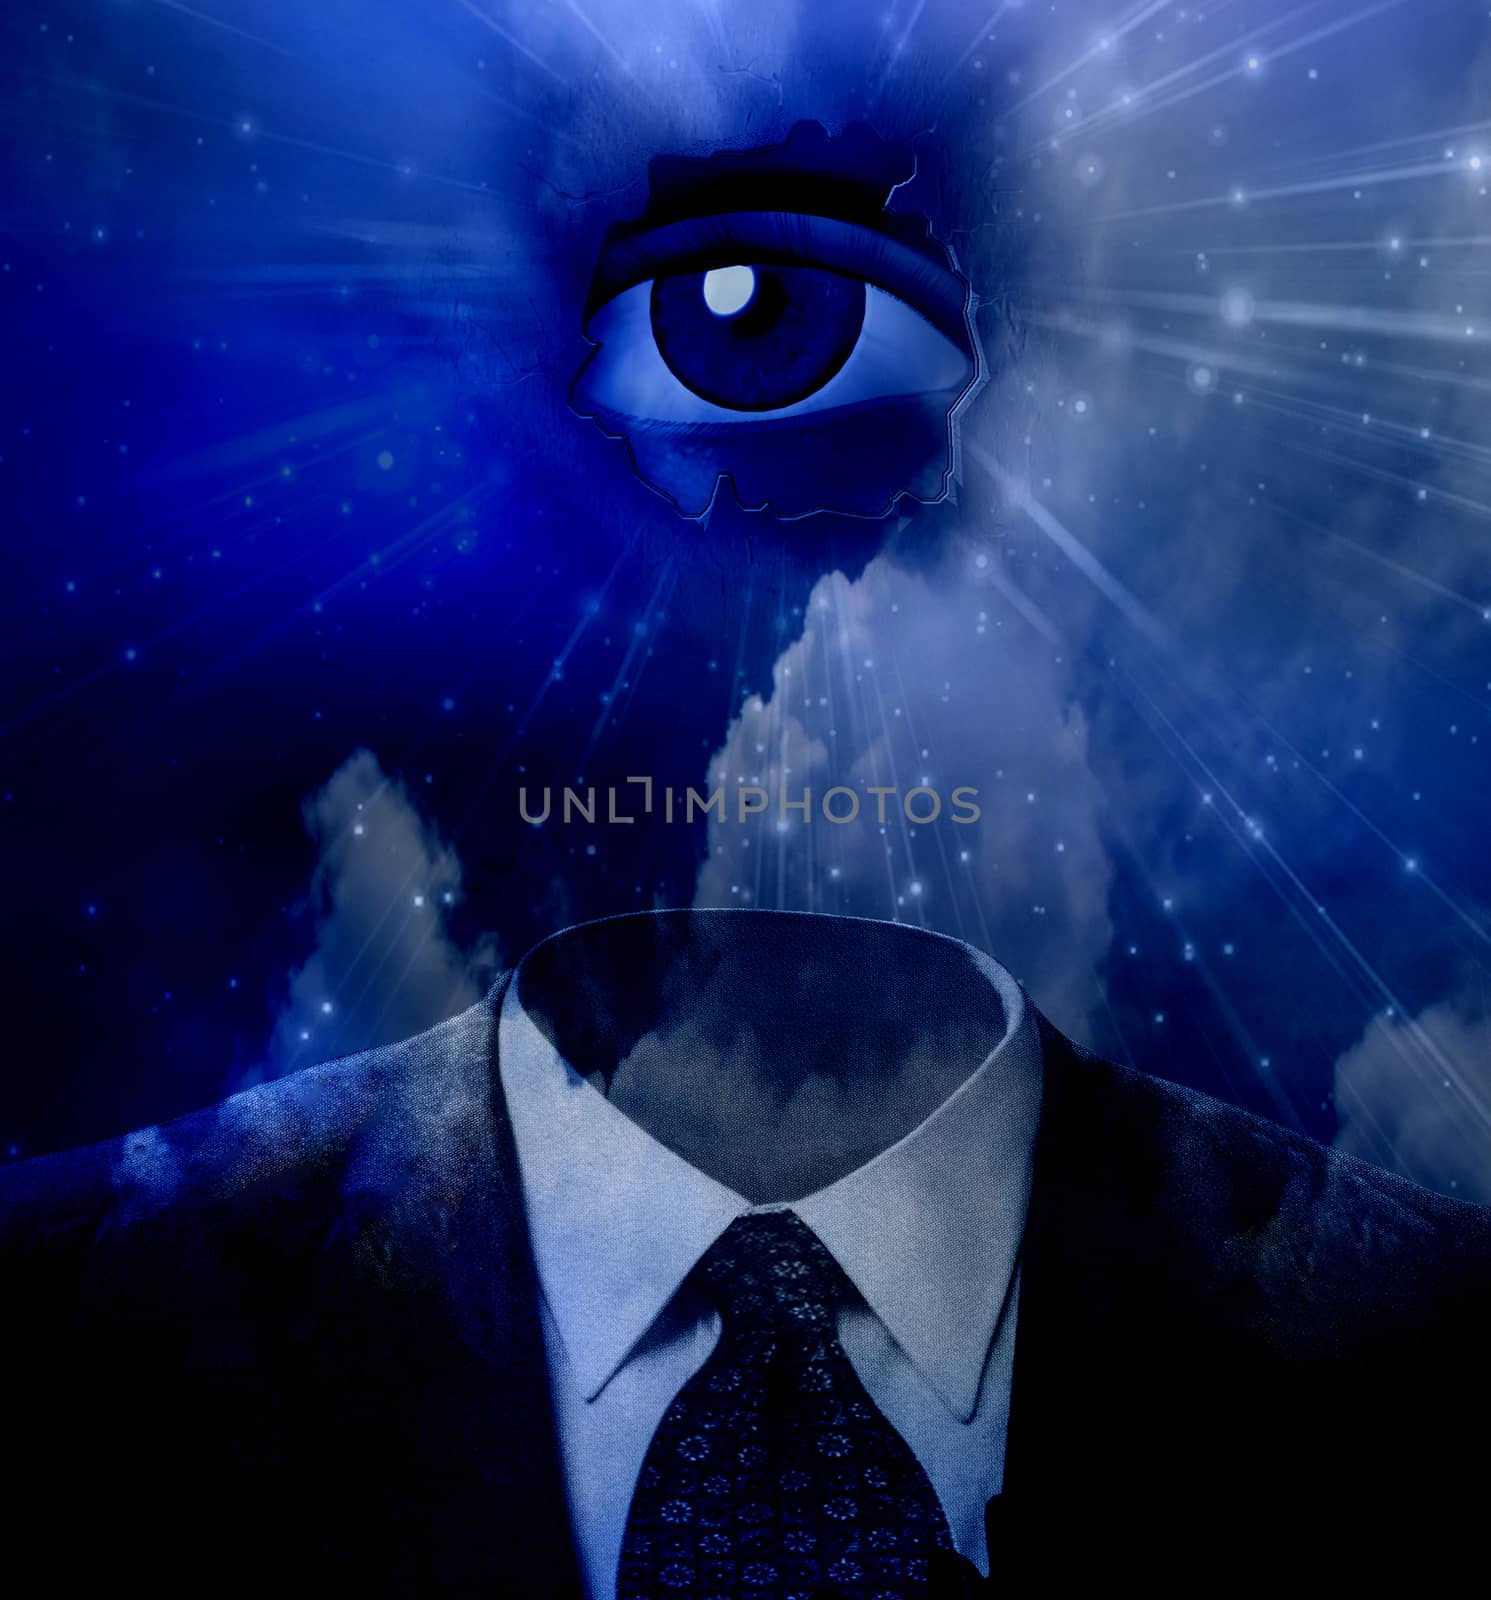 Overseer. Man's suit and God's eye